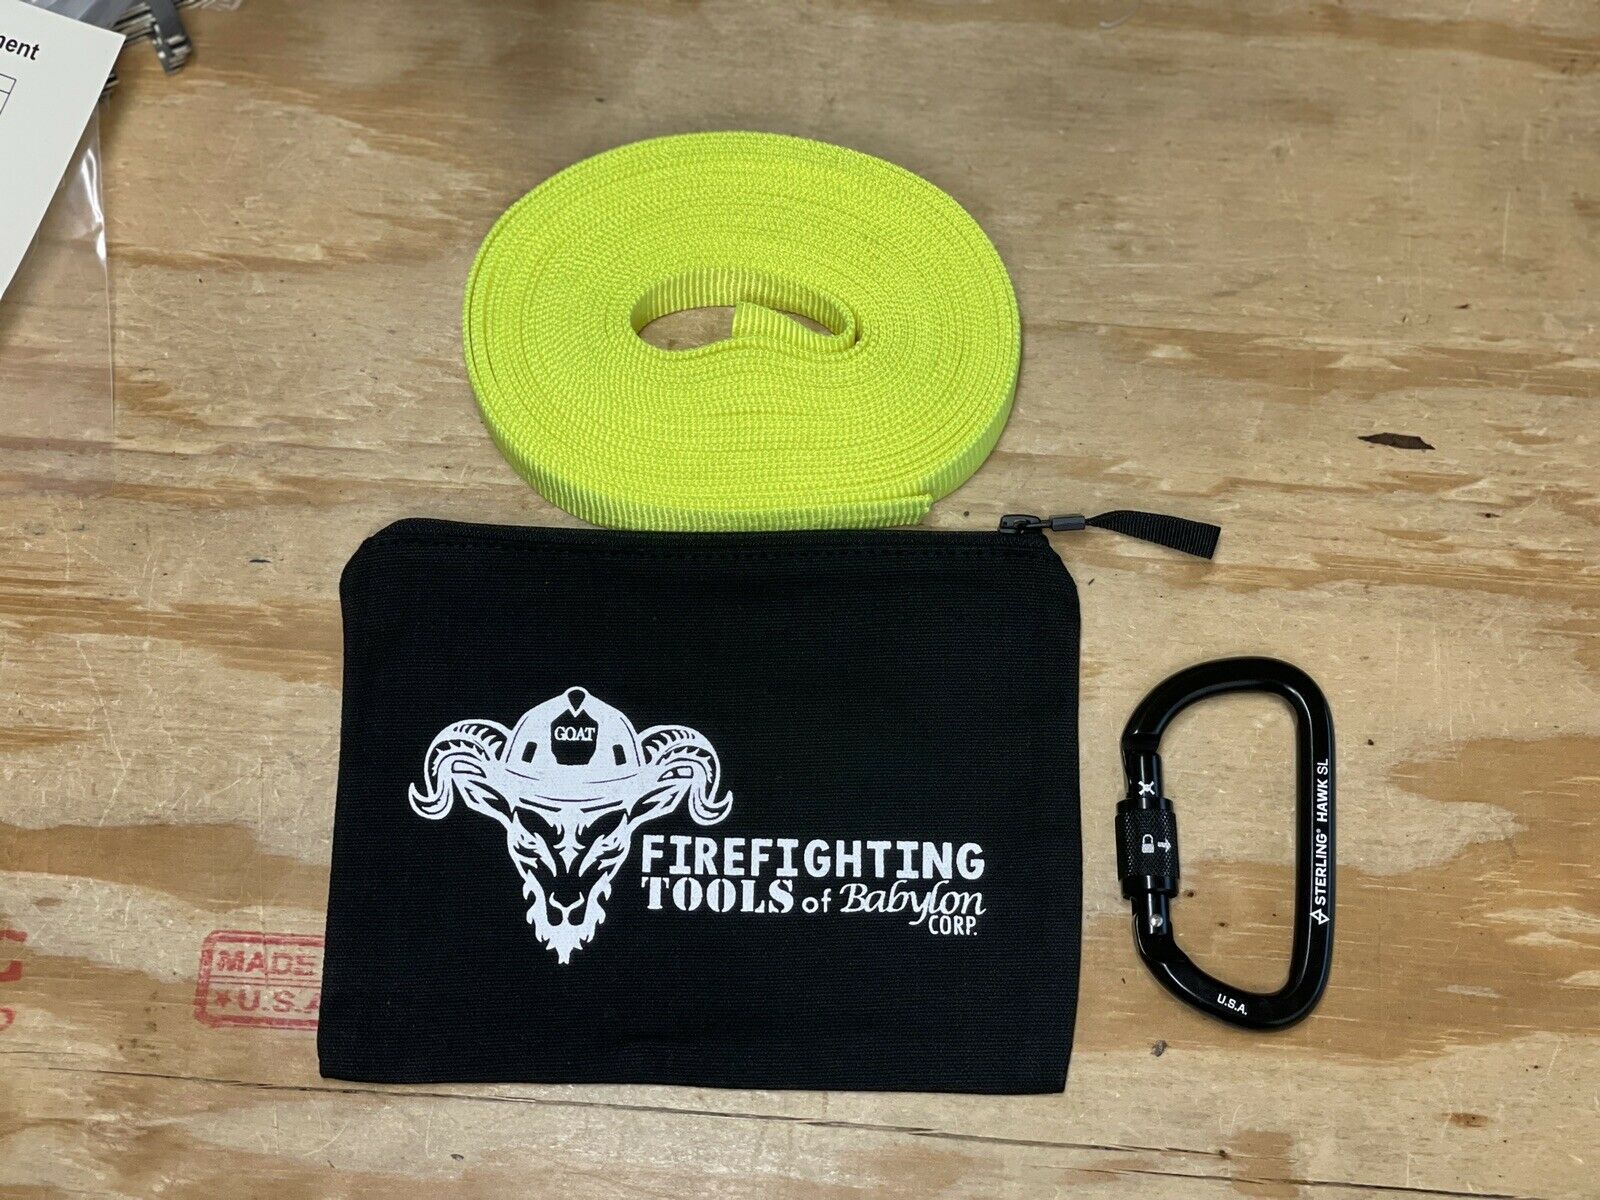 Firefighter Rescue Webbing And Carabiner Kit - Made In Usa